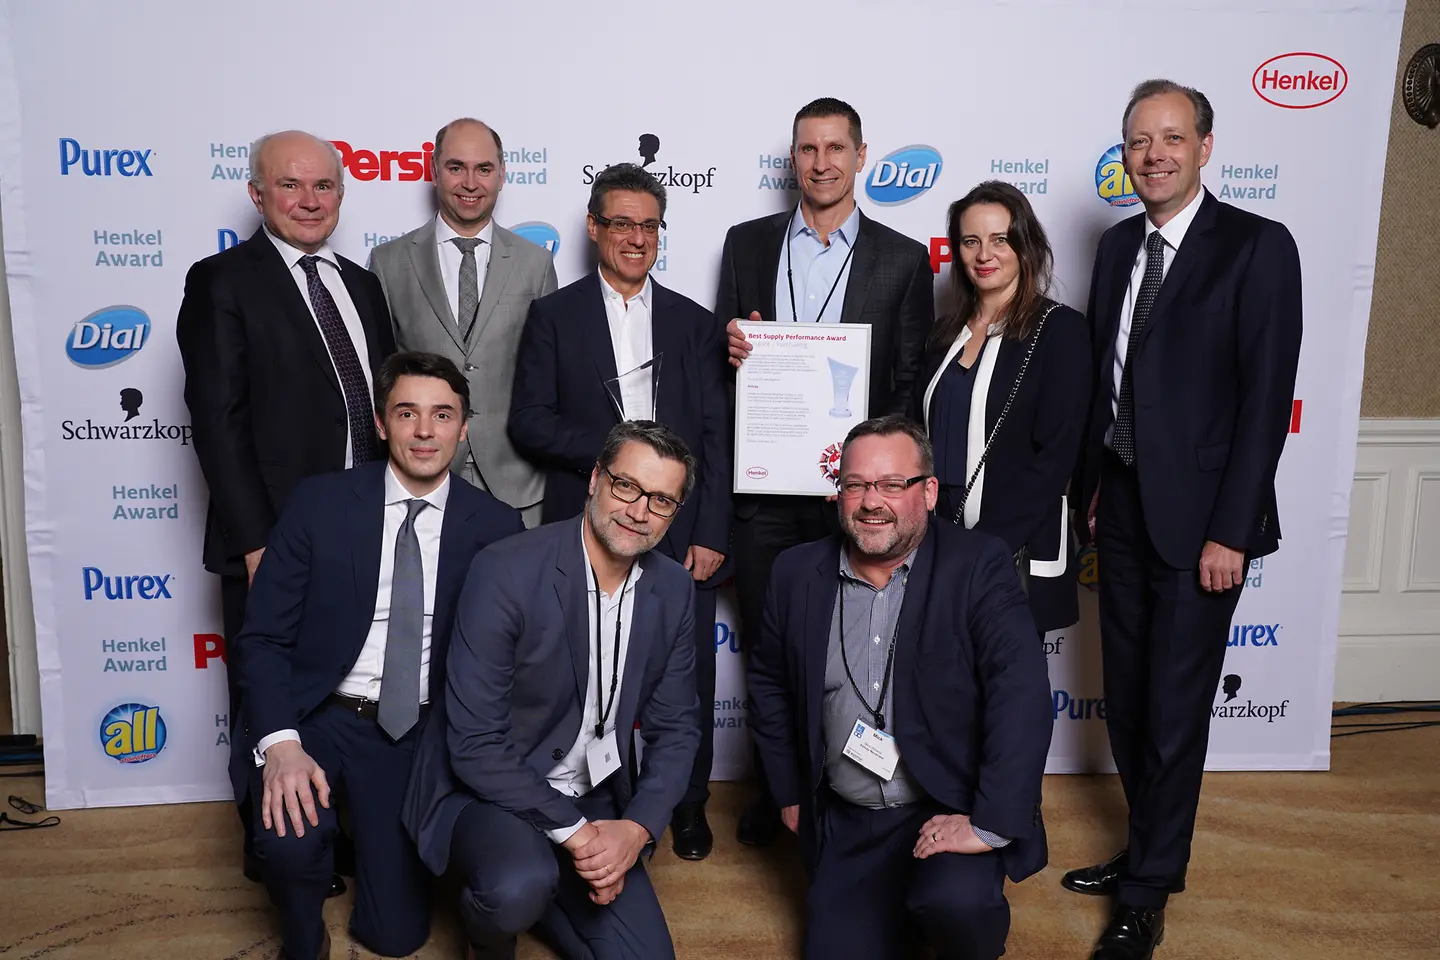 Best Supply Performance / Solvay (winner): back: Bertrand Conquéret, Niclas Wallén, Christophe Clemente, Mike Radossich, Sonia Renac, Thomas Holenia; front: Etienne Galan, Jean-Pierre Marchand, Mick Holland